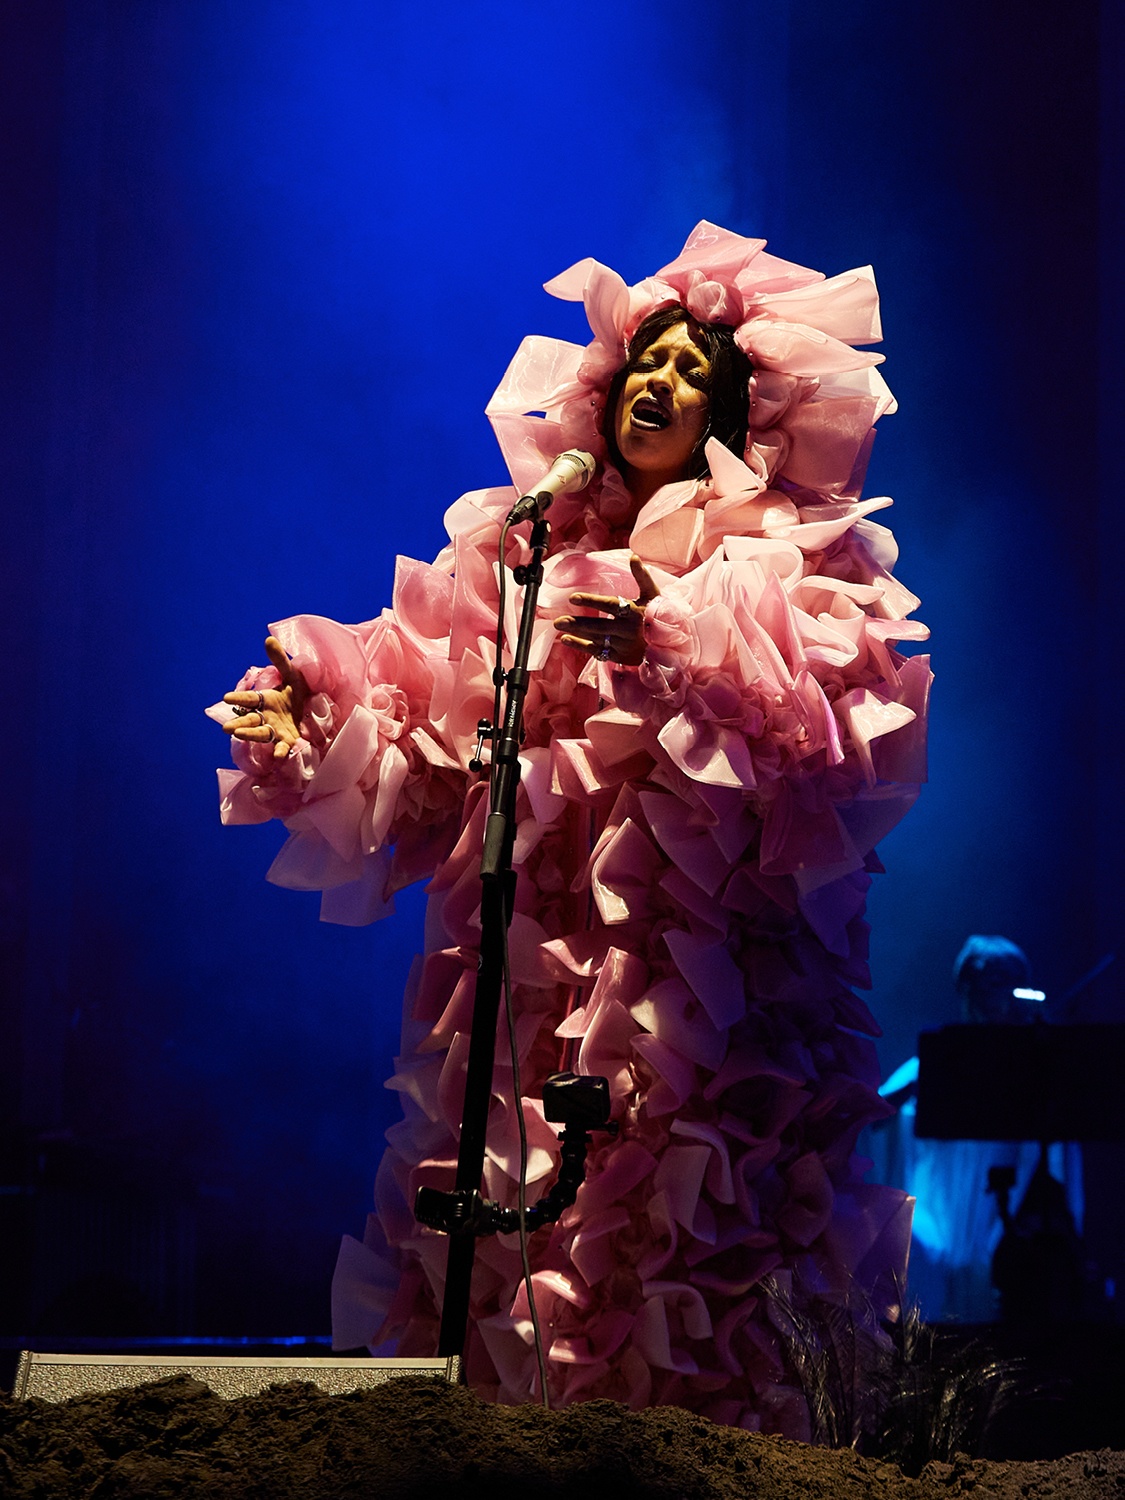 A singer on stage performing in front of a microphone while standing on dirt piled on the stage and wearing a puffy, frilly pink dress with a head covering